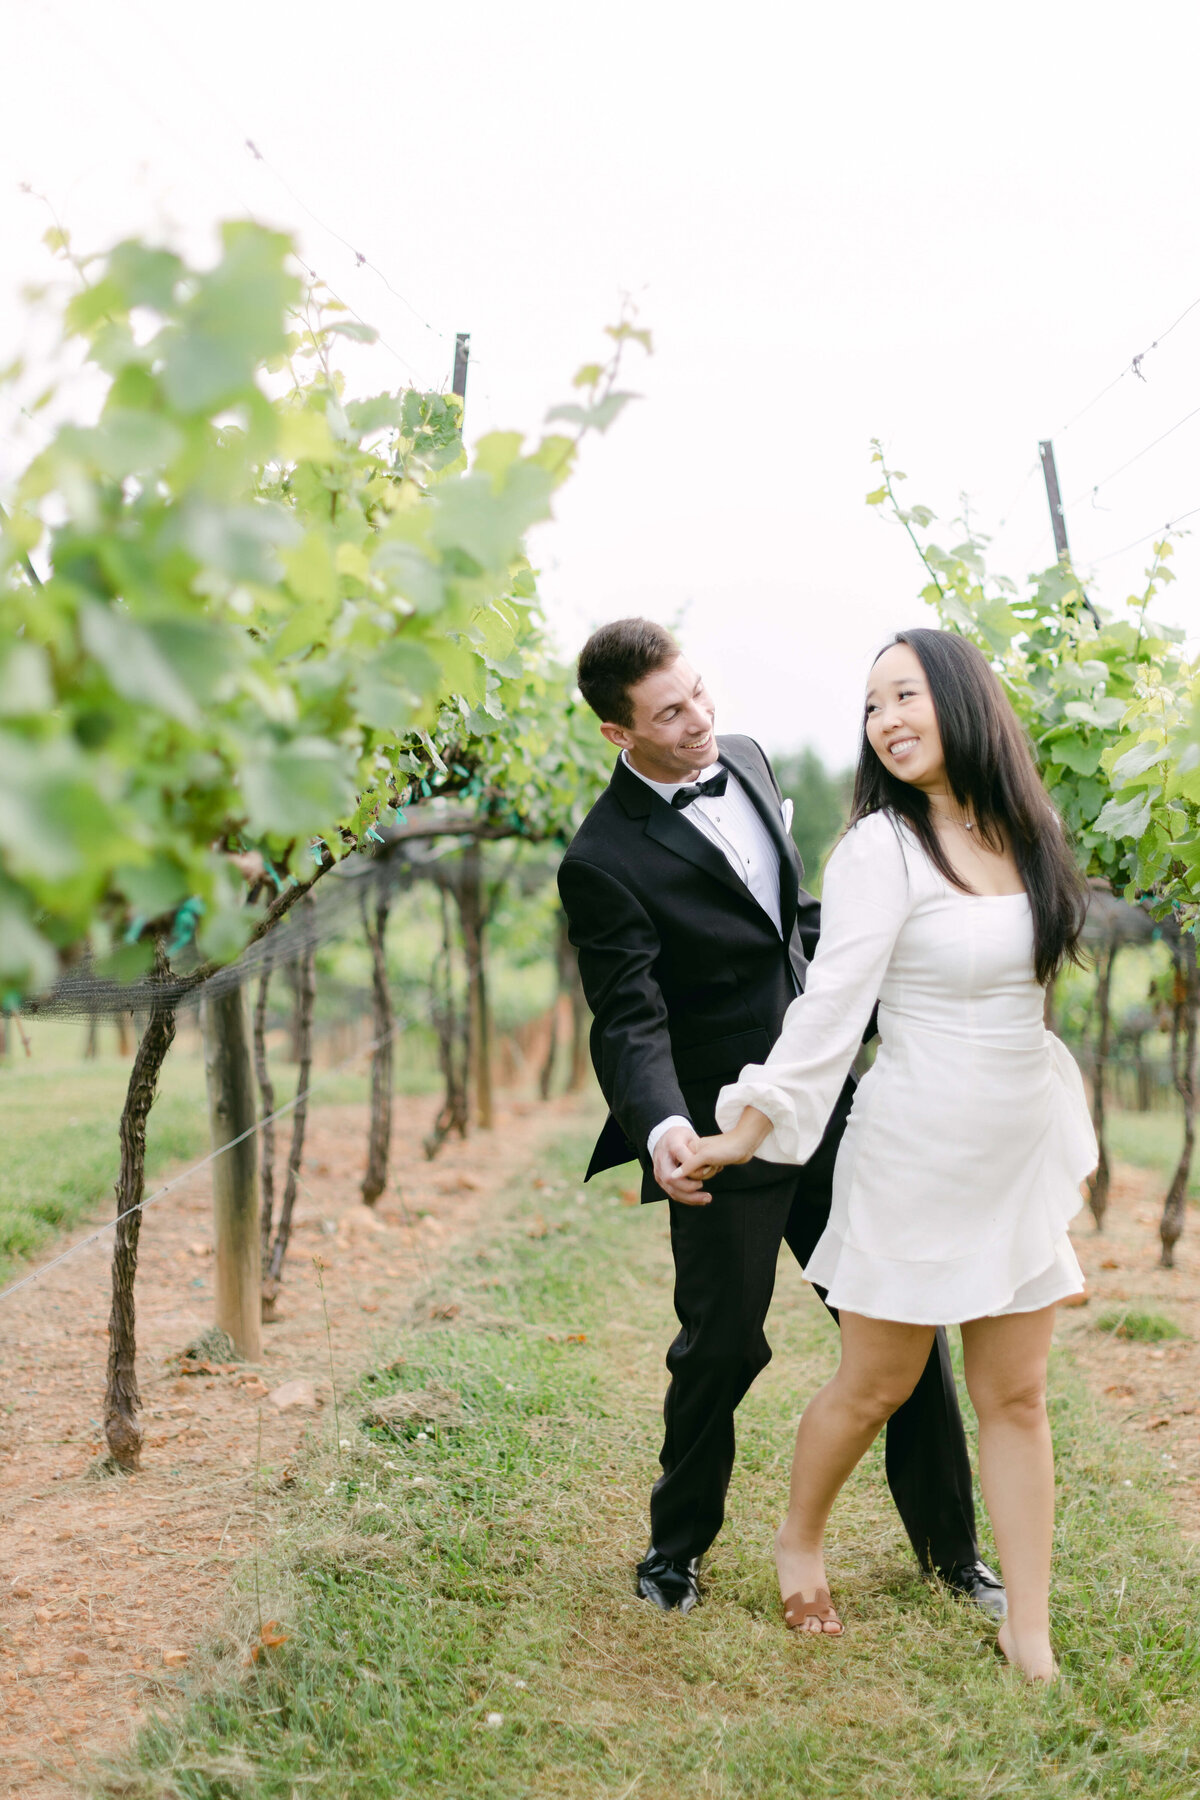 A bride and groom dance in a vineyard.